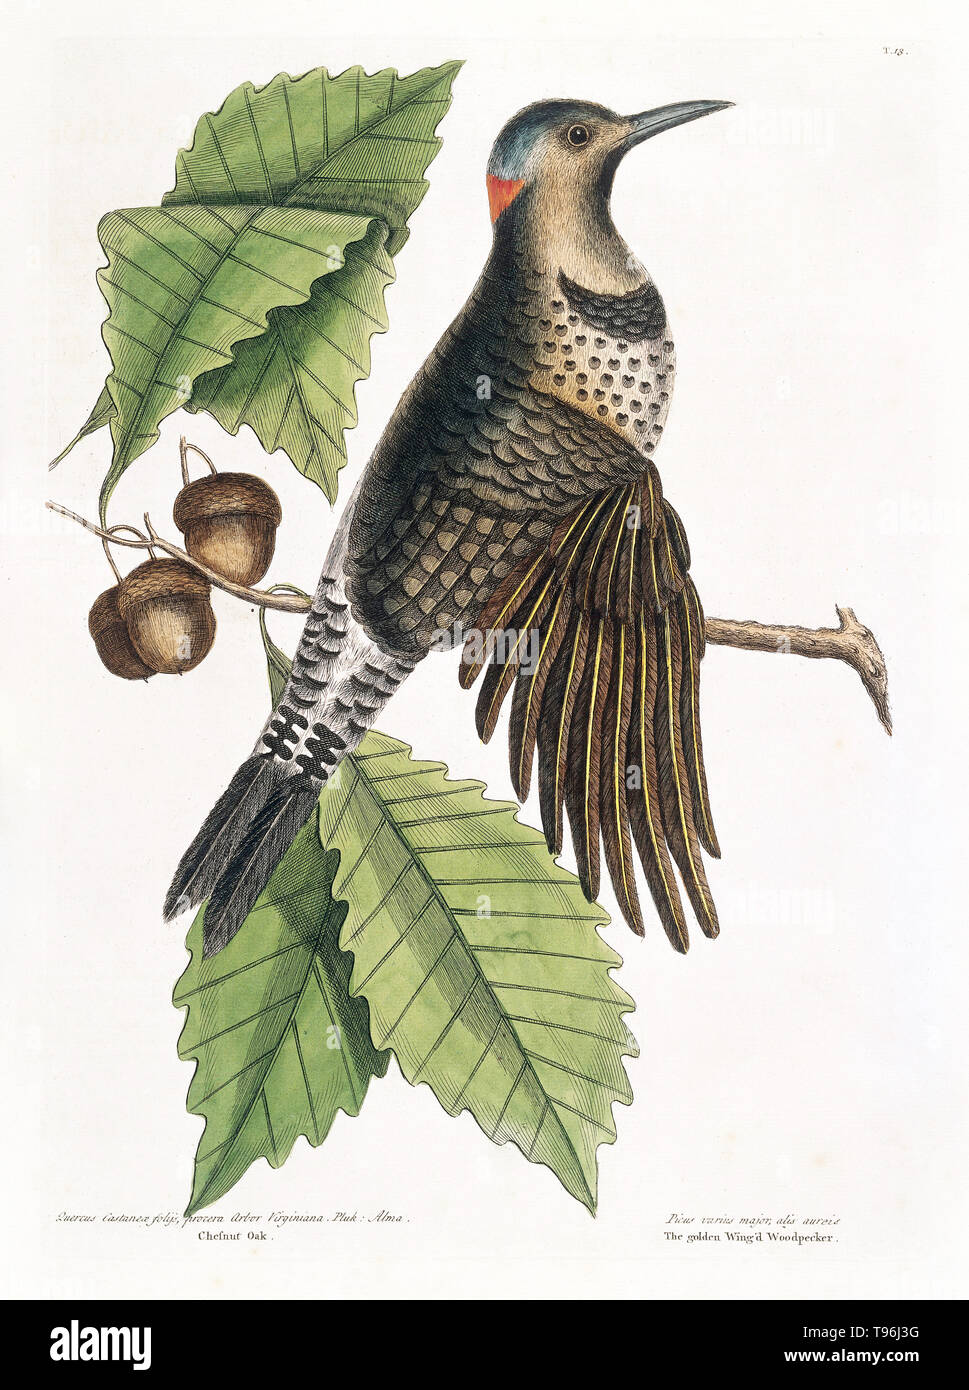 Gold-winged woodpecker on Chesnut oak, 1731. Illustration showing a Gold-winged woodpecker (Picus major alis aureis, now Colaptes auratus, northern flicker) perched on a branch of Chesnut oak (Quercus castaneae foliis). This bird is distinguished by the beams of all the wing feathers which are of a bright gold color. On the hind part of the head is a large scarlet spot. Stock Photo